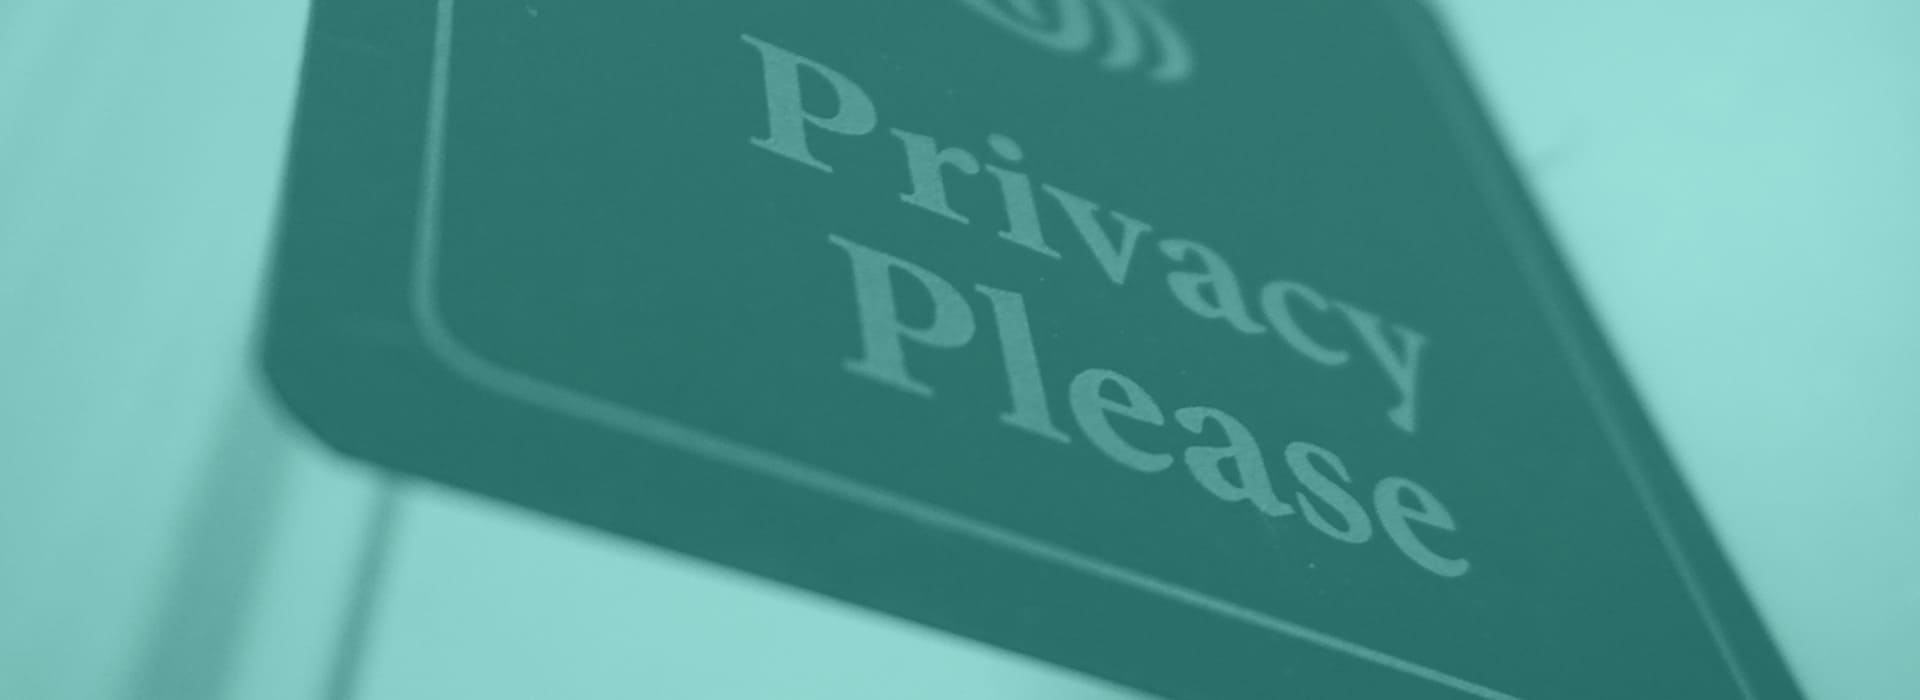 privacy-policy-slide